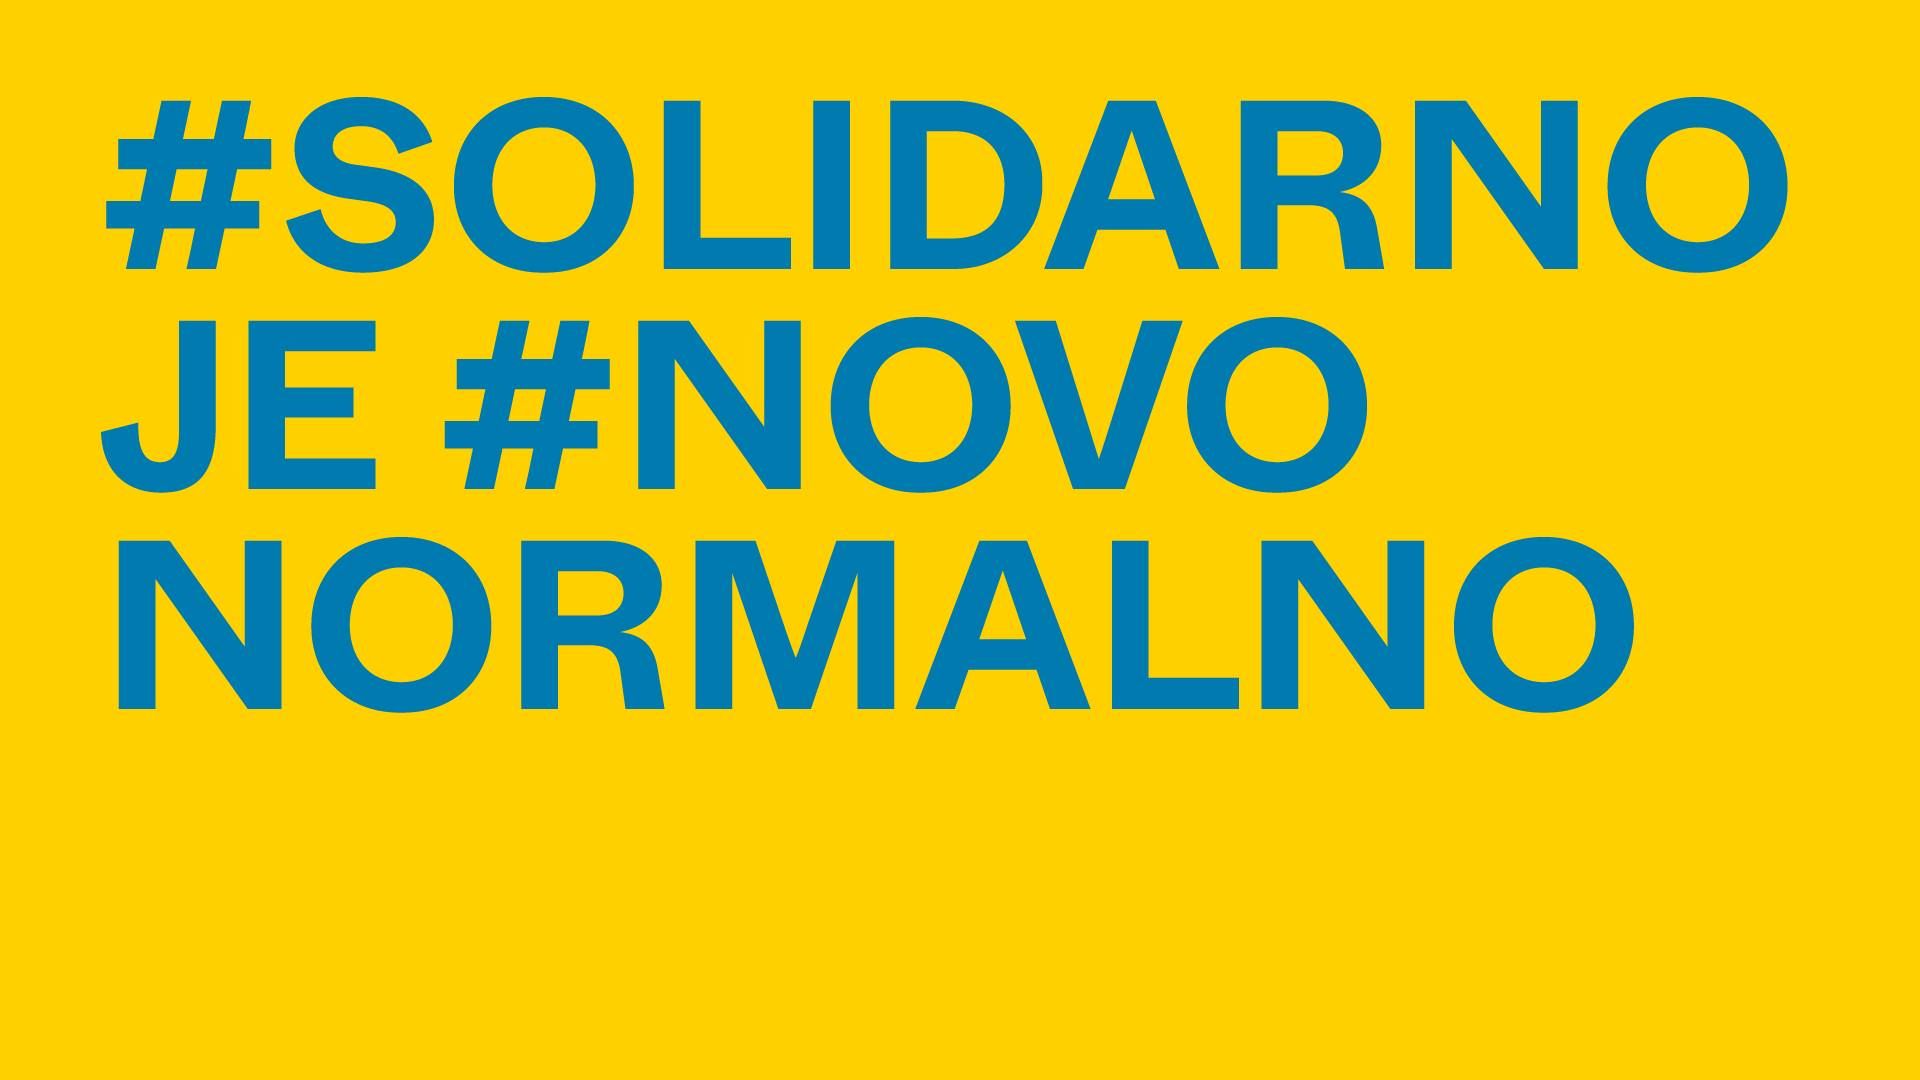 #Solidary as our #NewNormal?